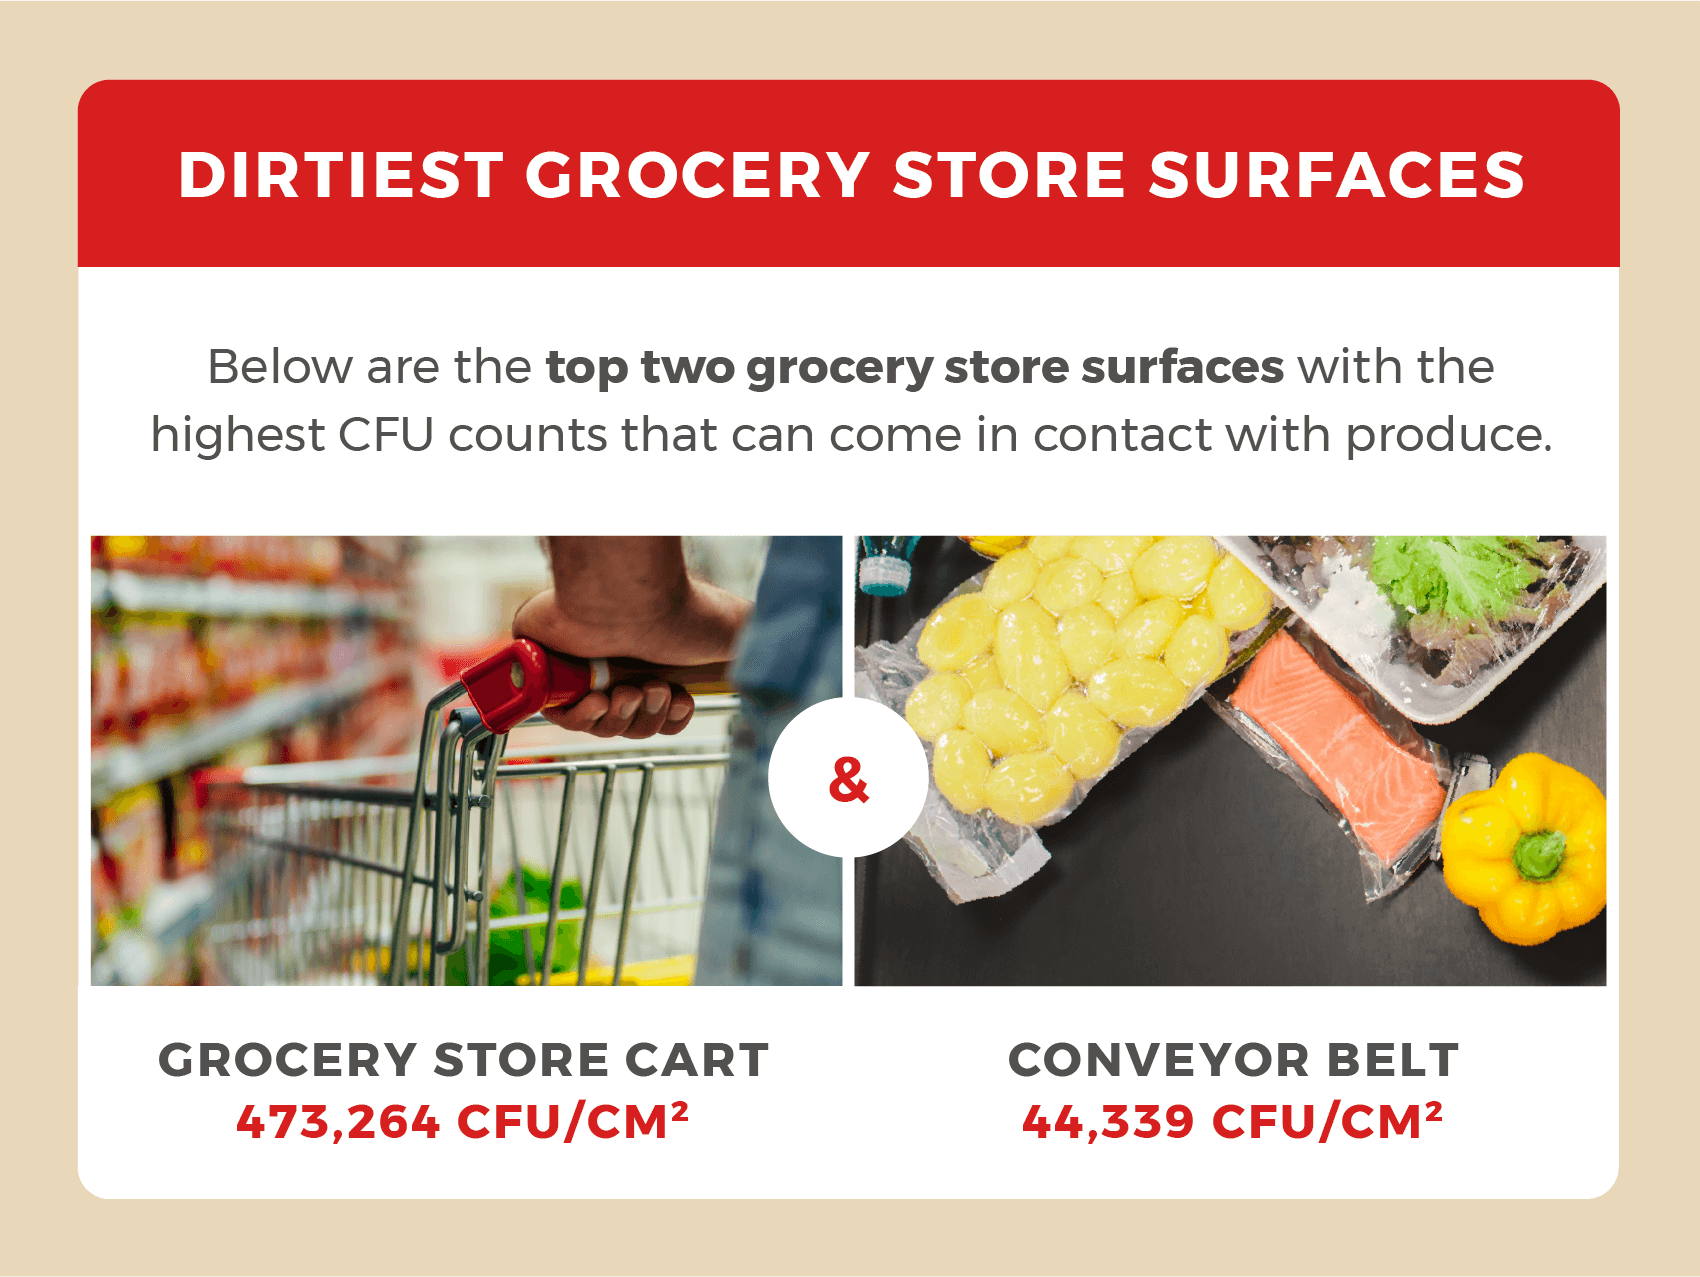 Shopping carts and conveyor belts are surfaces with the highest number of colony-forming units.